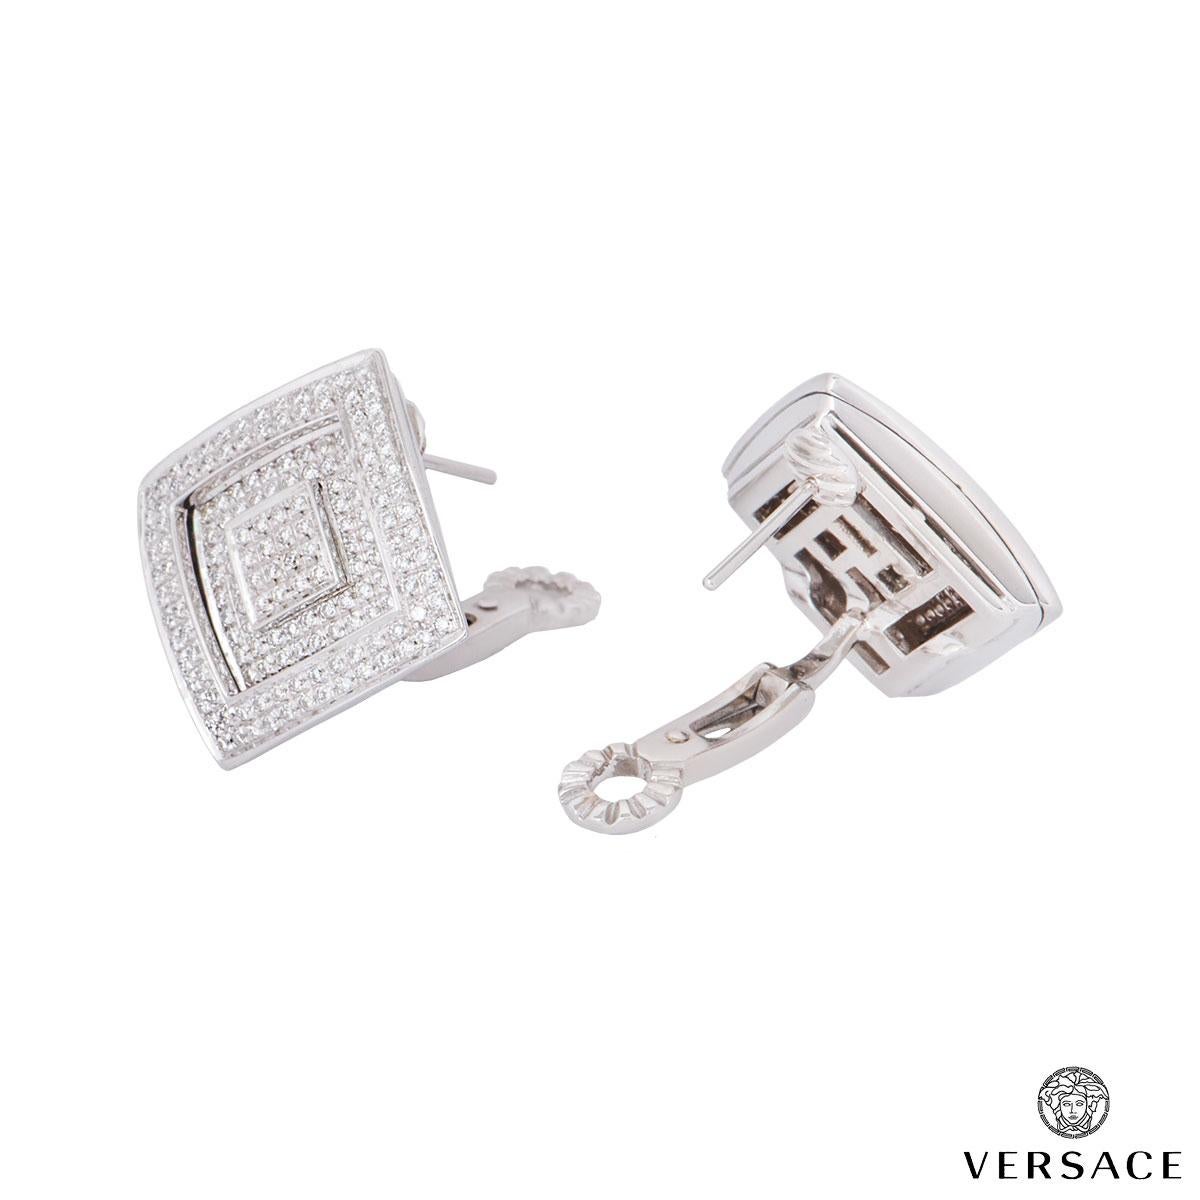 A pair of 18k white gold diamond earrings by Versace. The earrings feature pave set round brilliant cut diamonds in a square design with an embossed square in the centre with an approximate weight of 1.10ct. The earrings feature a post and lever